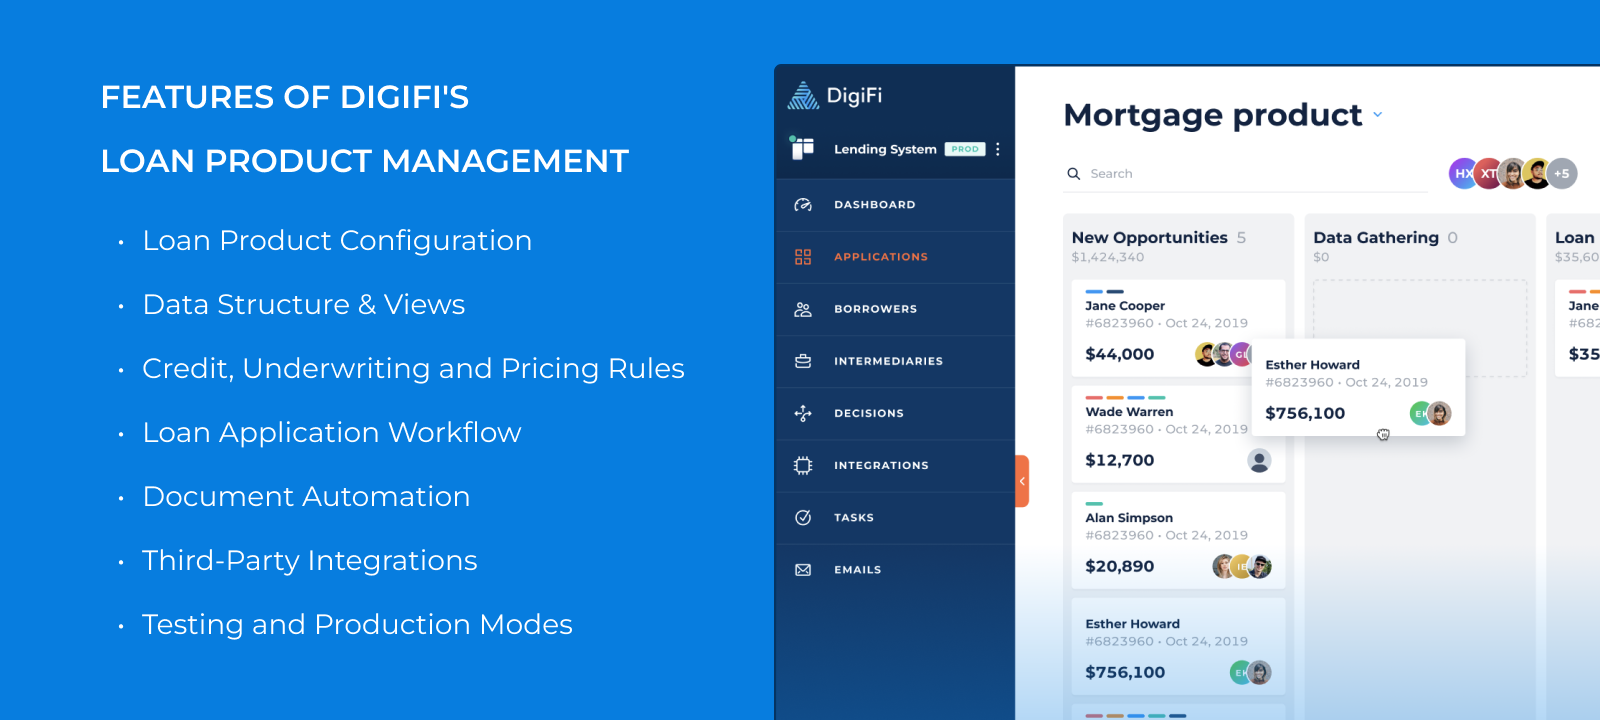 Features of DigiFi's Loan Product Management